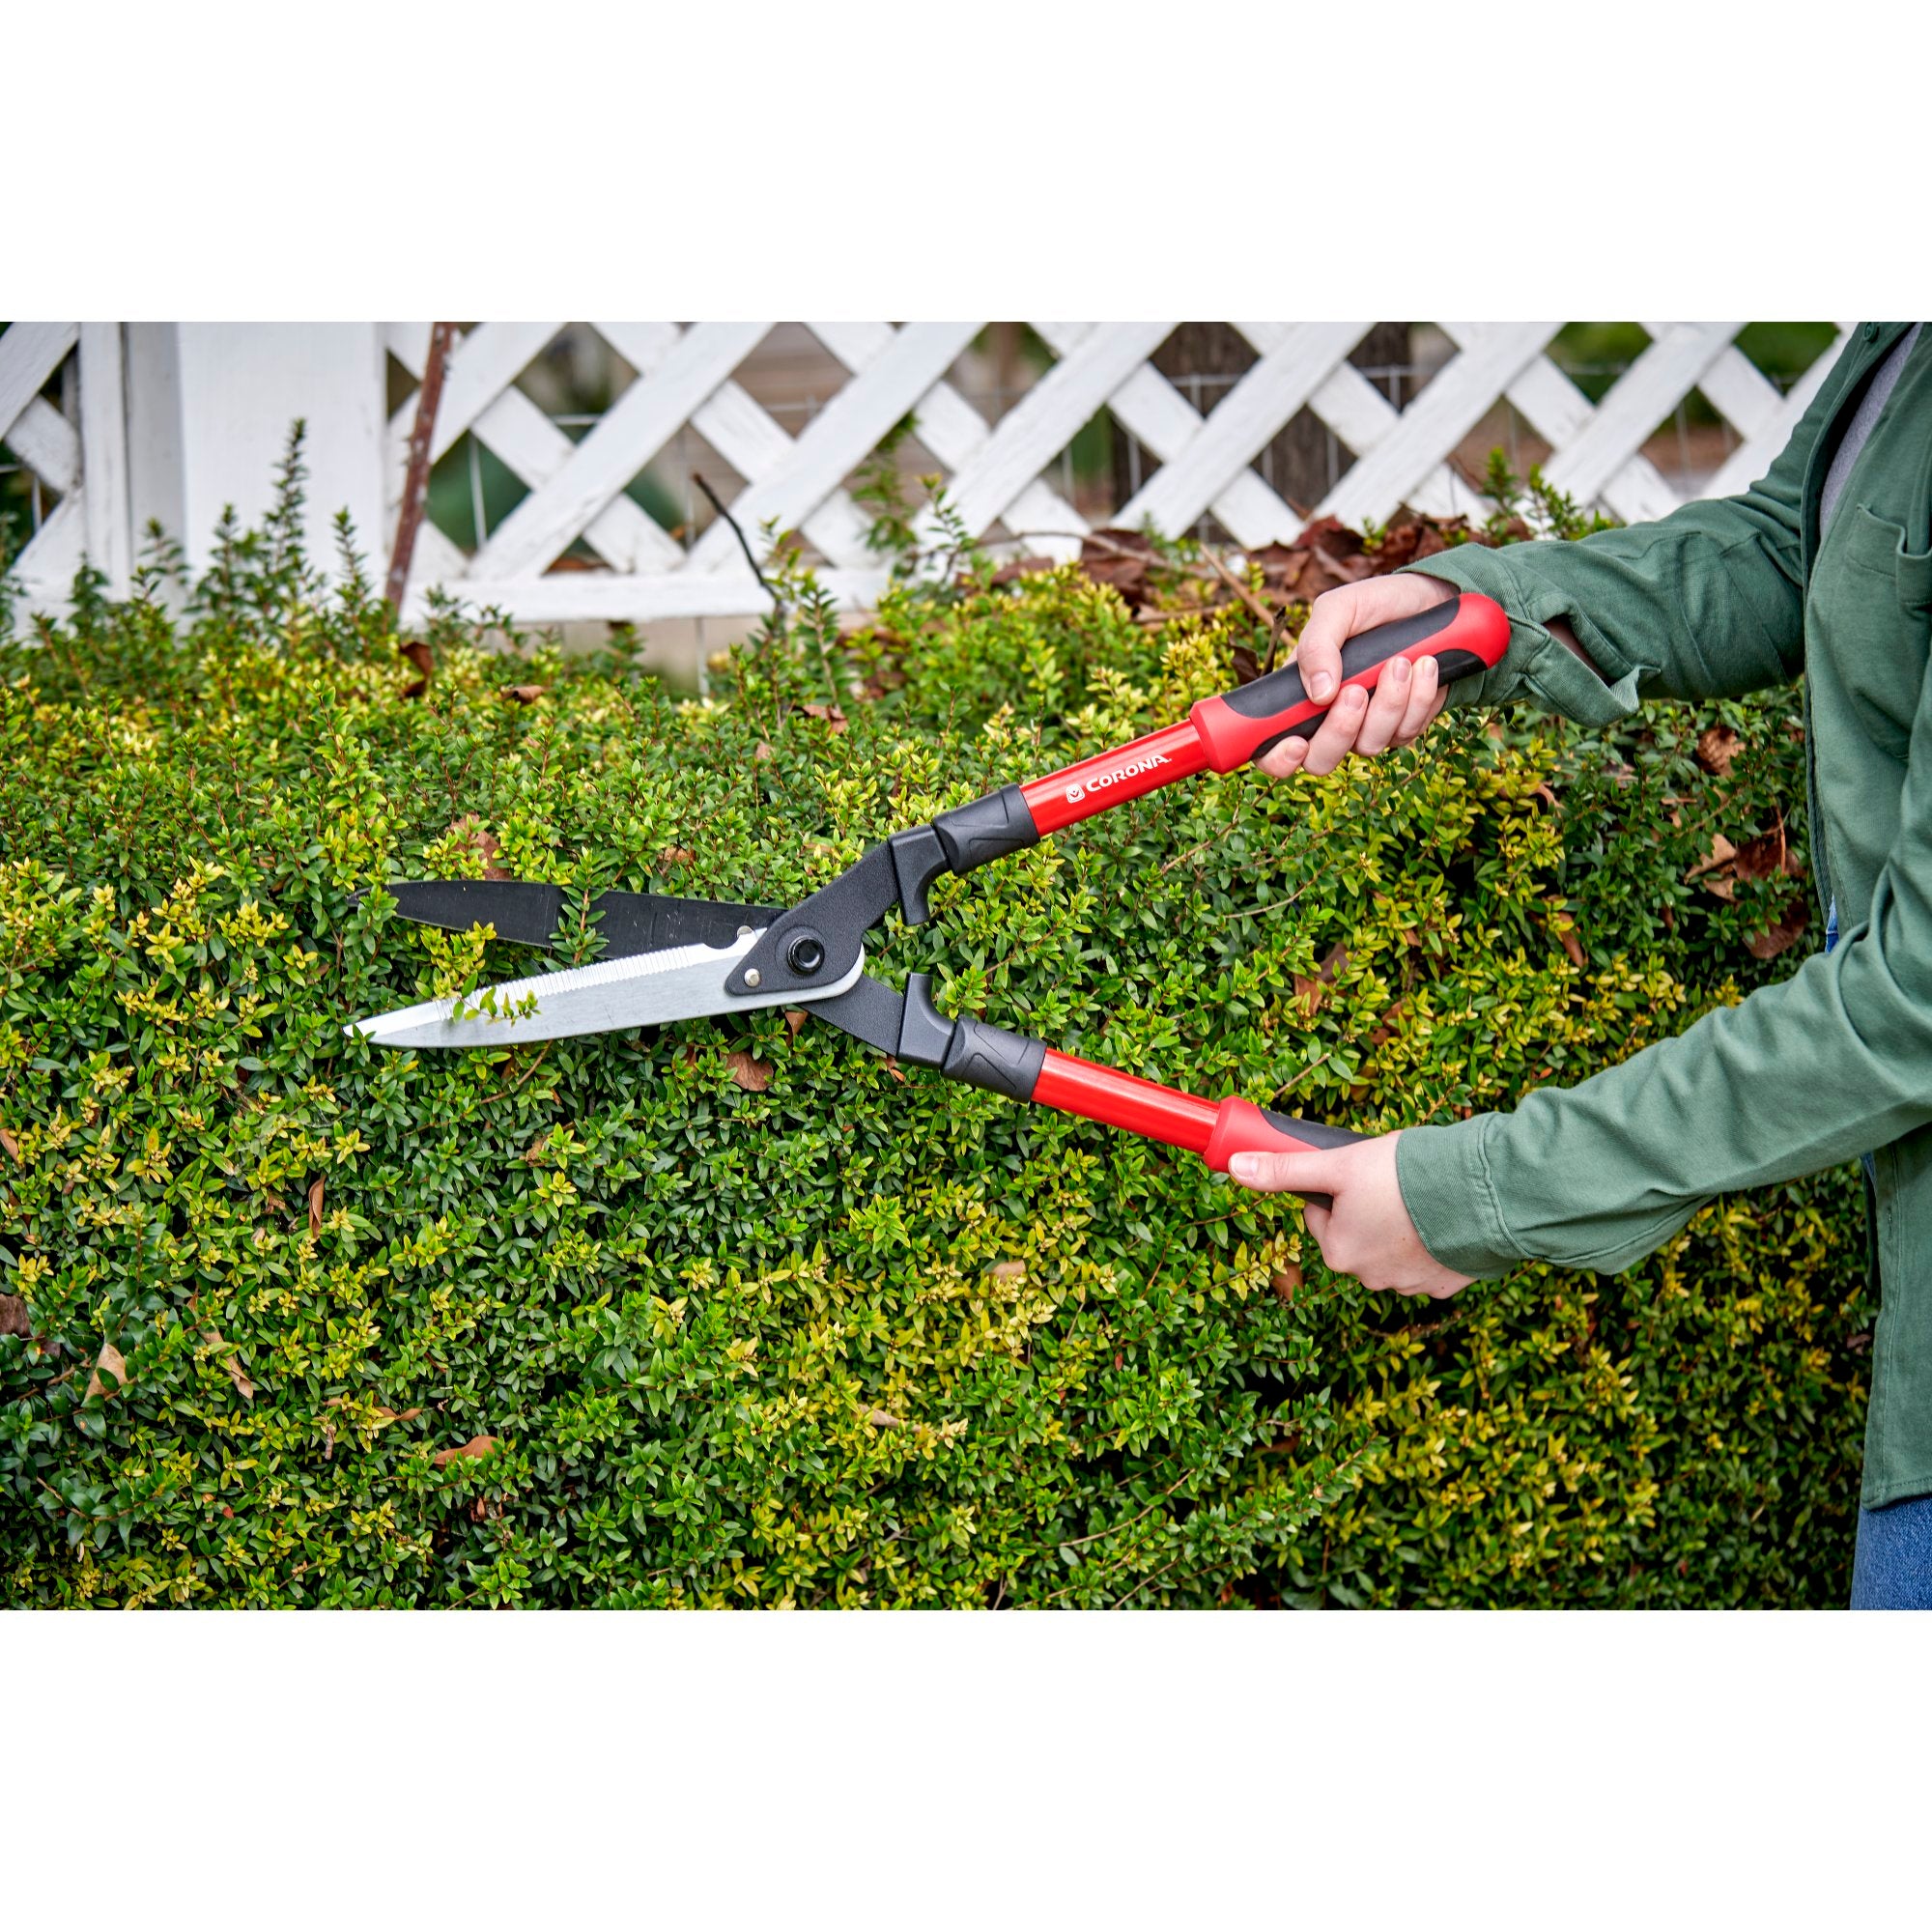 Compound Action Hedge Shears, 9 in. Blades